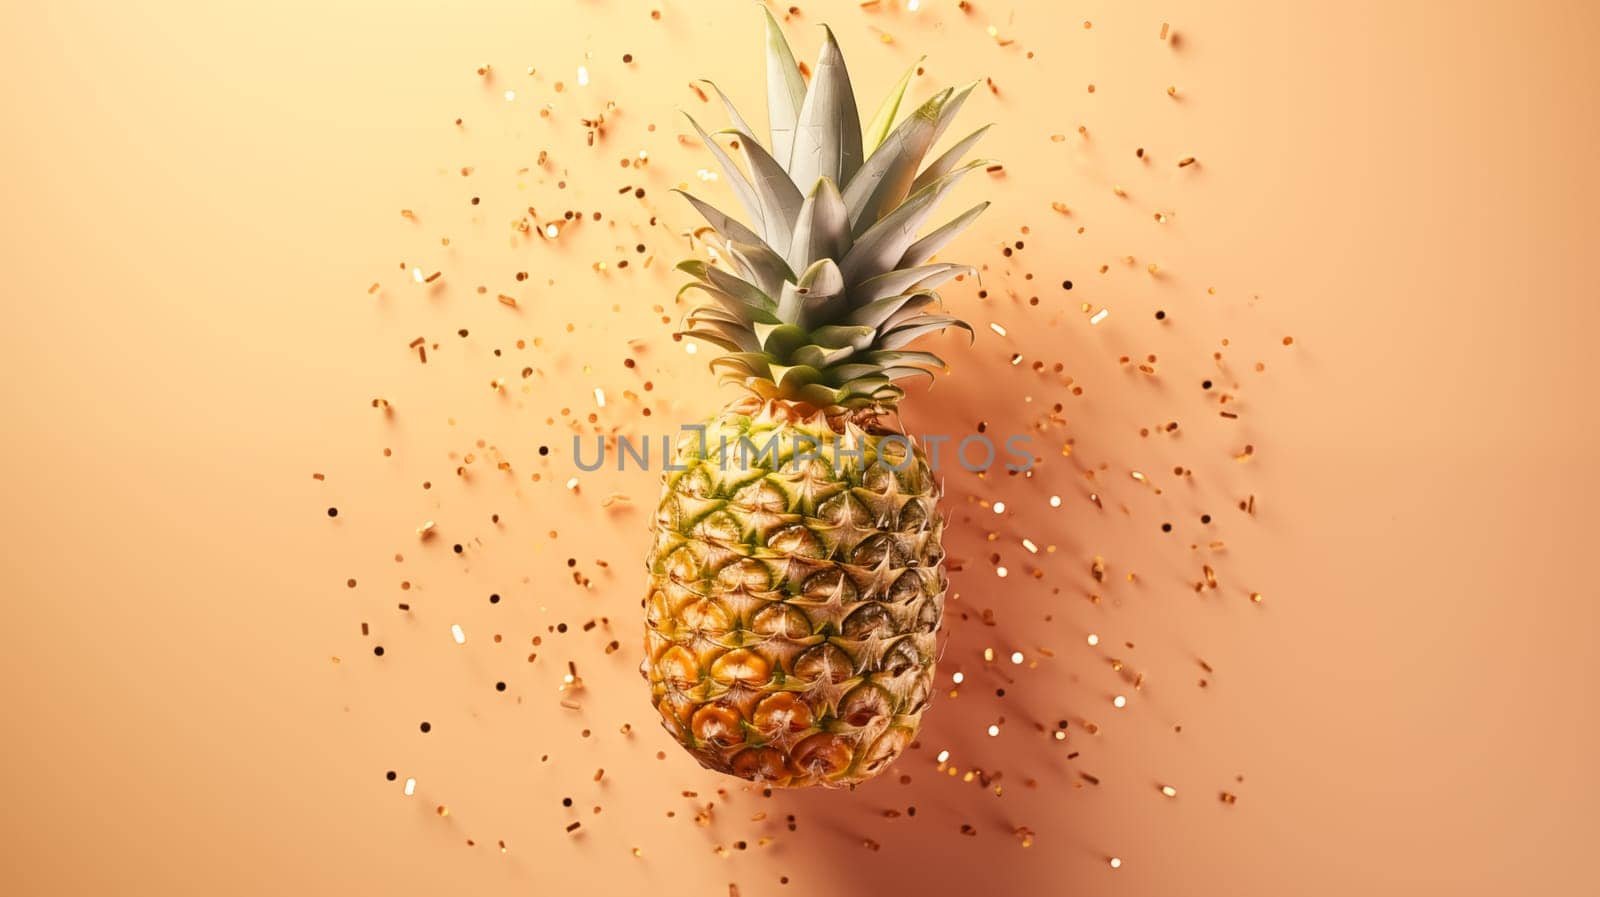 Pineapple is lying on a peach-colored background, golden confetti is scattered nearby by Zakharova